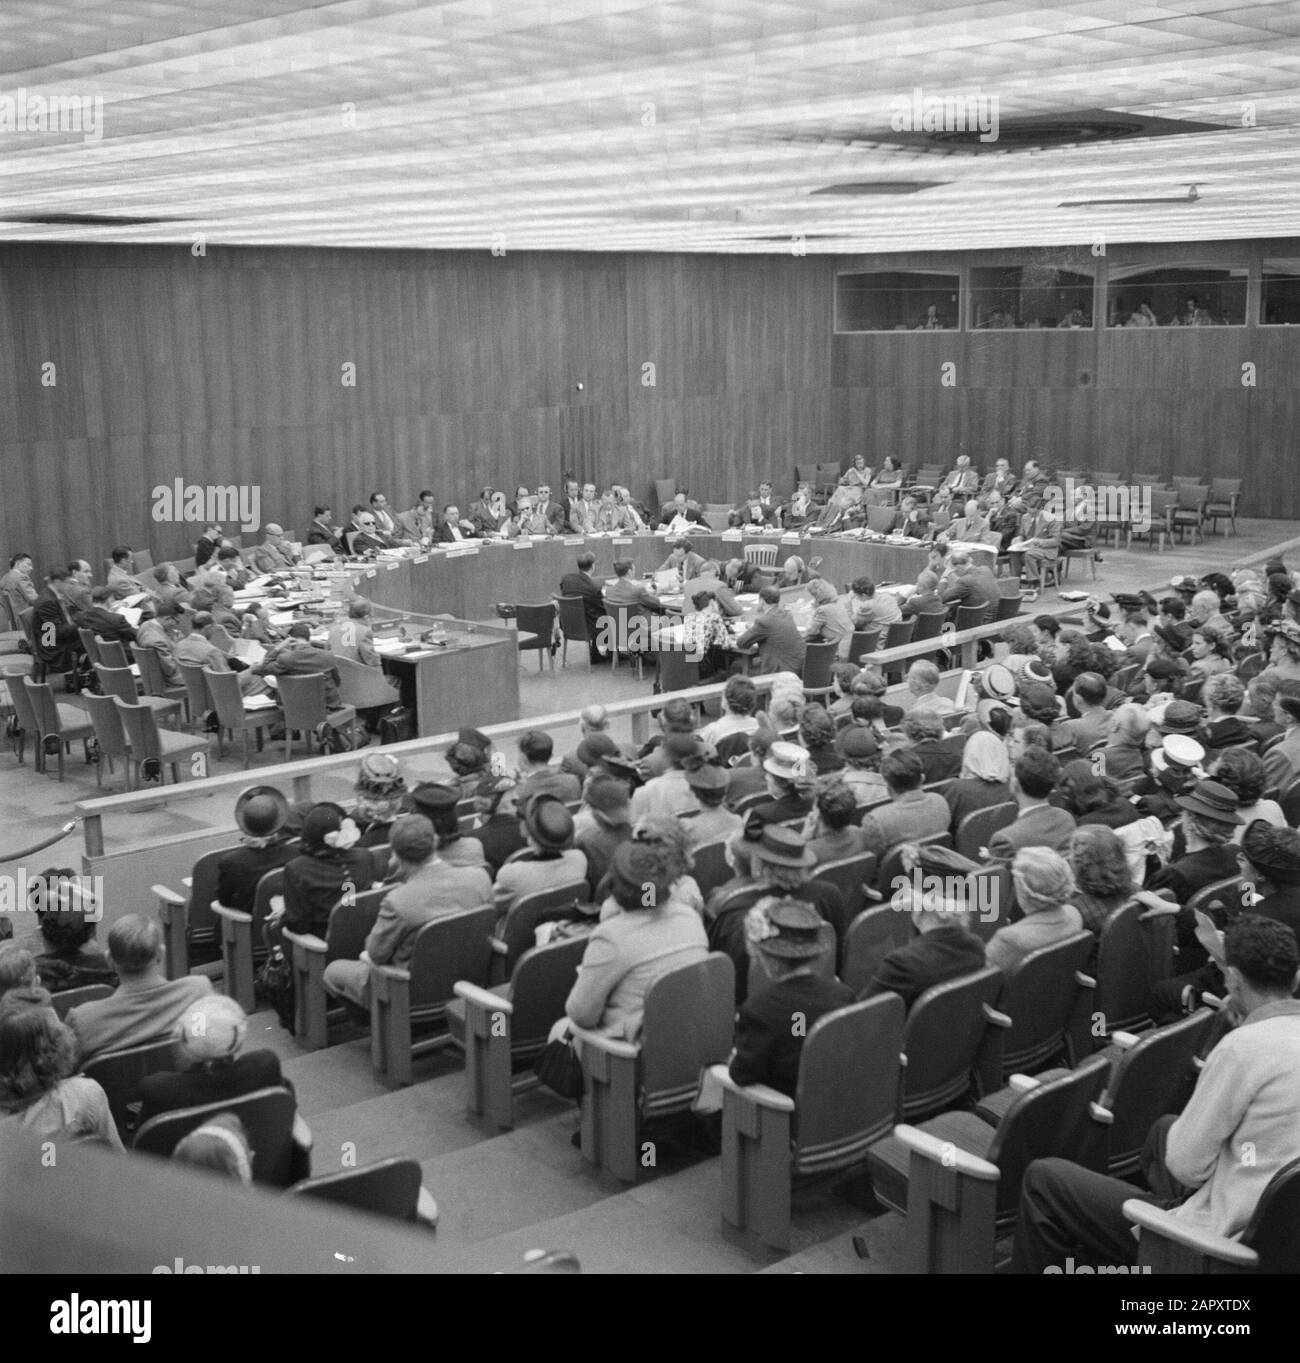 United Nations Headquarters in Lake Success  United Nations Conference Room with at the back of the main table and in front of the public gallery Annotation: The United Nations Headquarters was from 1946-1951 based in Lake Success (NY). At the time when Van de Poll took this picture, the United Nations Commission of Good Services came together in Batavia, which was set up at the end of August 1947 and was the prelude to the Dutch-Indonesian negotiations that would lead to the independence of Indonesia in 1949 Date: June 1948 Location: New York (state), USA Keywords: Meetings Stock Photo